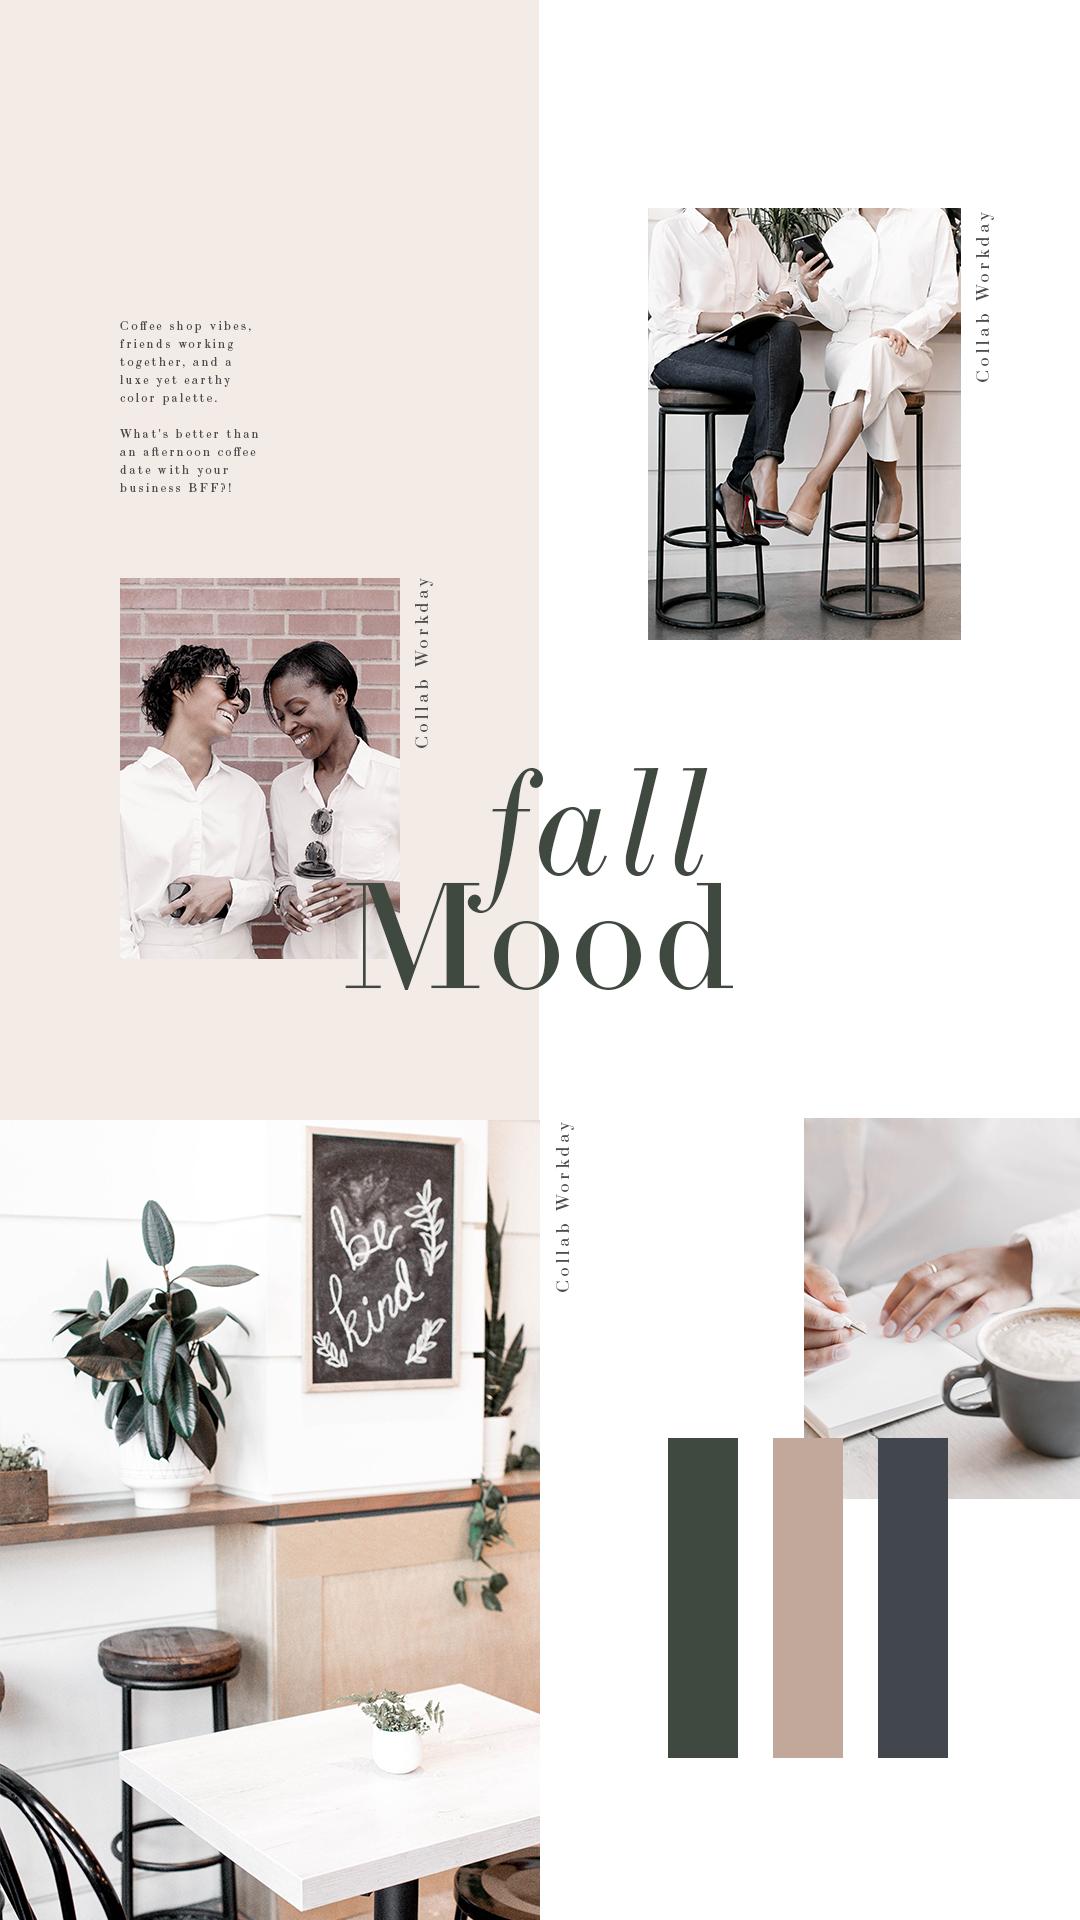 Taupe, forrest green and dark blue combine to create a sophisticated palette of stock images for business coaches, bloggers and creative women entrepreneurs. Click for more branding inspiration!